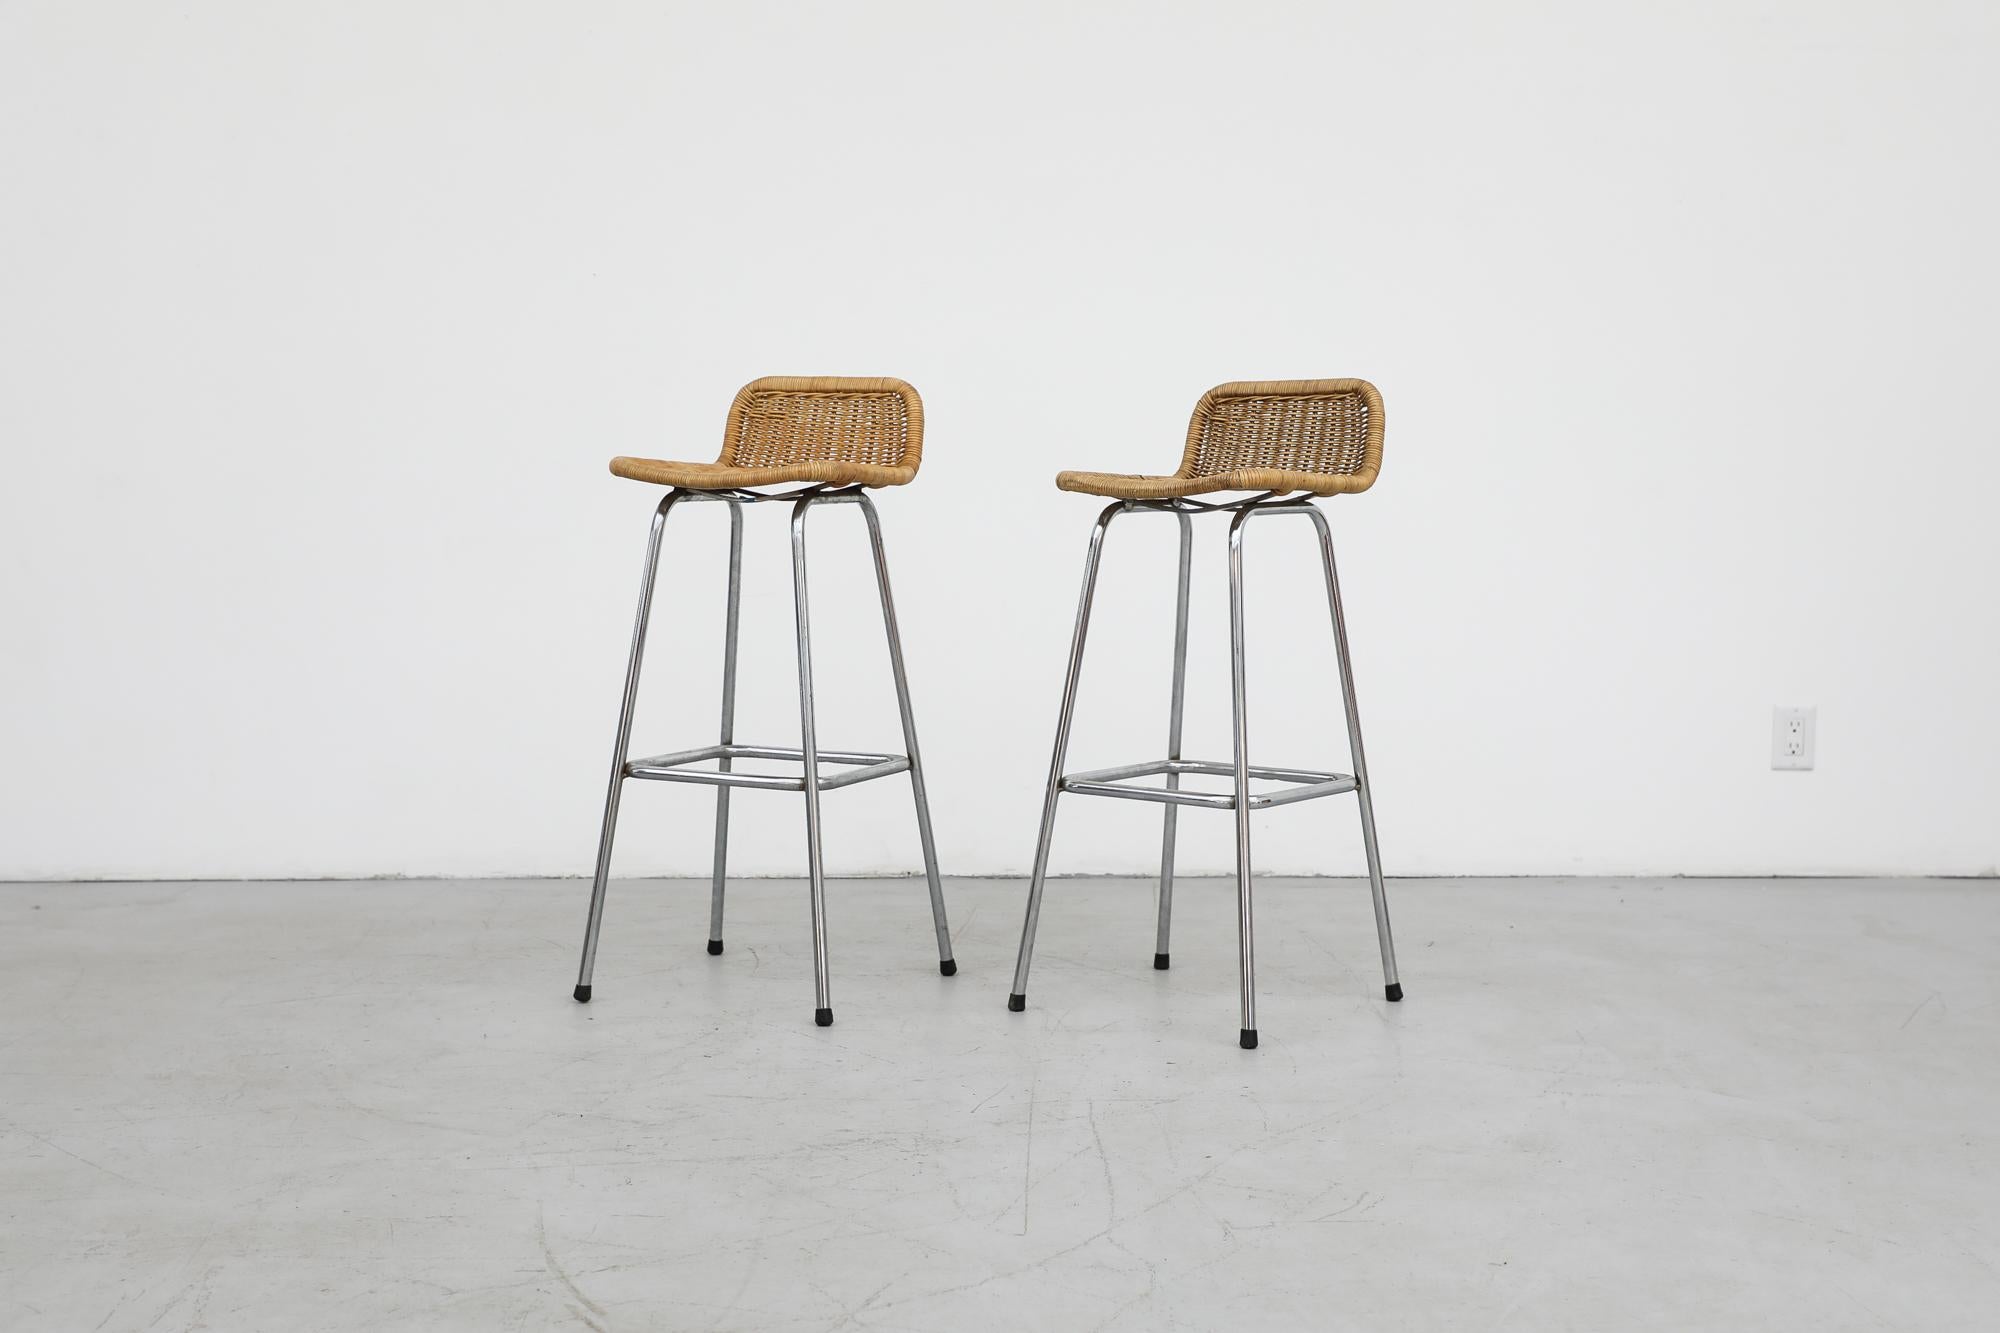 Charlotte Perriand style bar stools by Dirk van Sliedregt for Rohe Noordwolde with low rounded rattan seat backs and chrome tubular frames. Seat height is 30